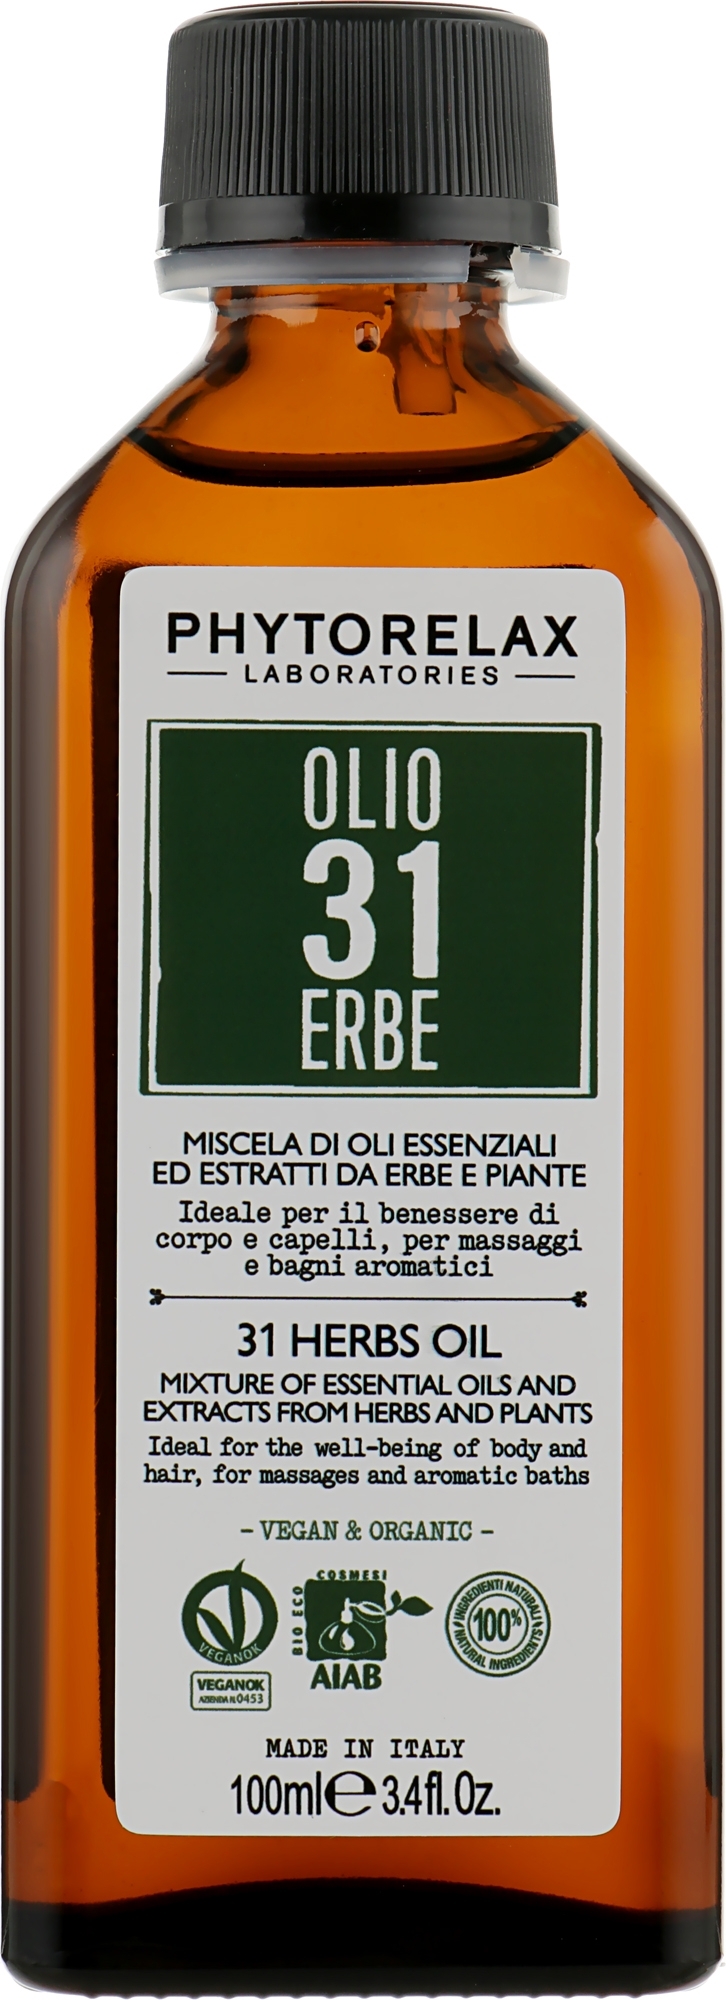 Essential Oil & Extract Blend - Phytorelax Laboratories 31 Herbs Oil — photo 100 ml